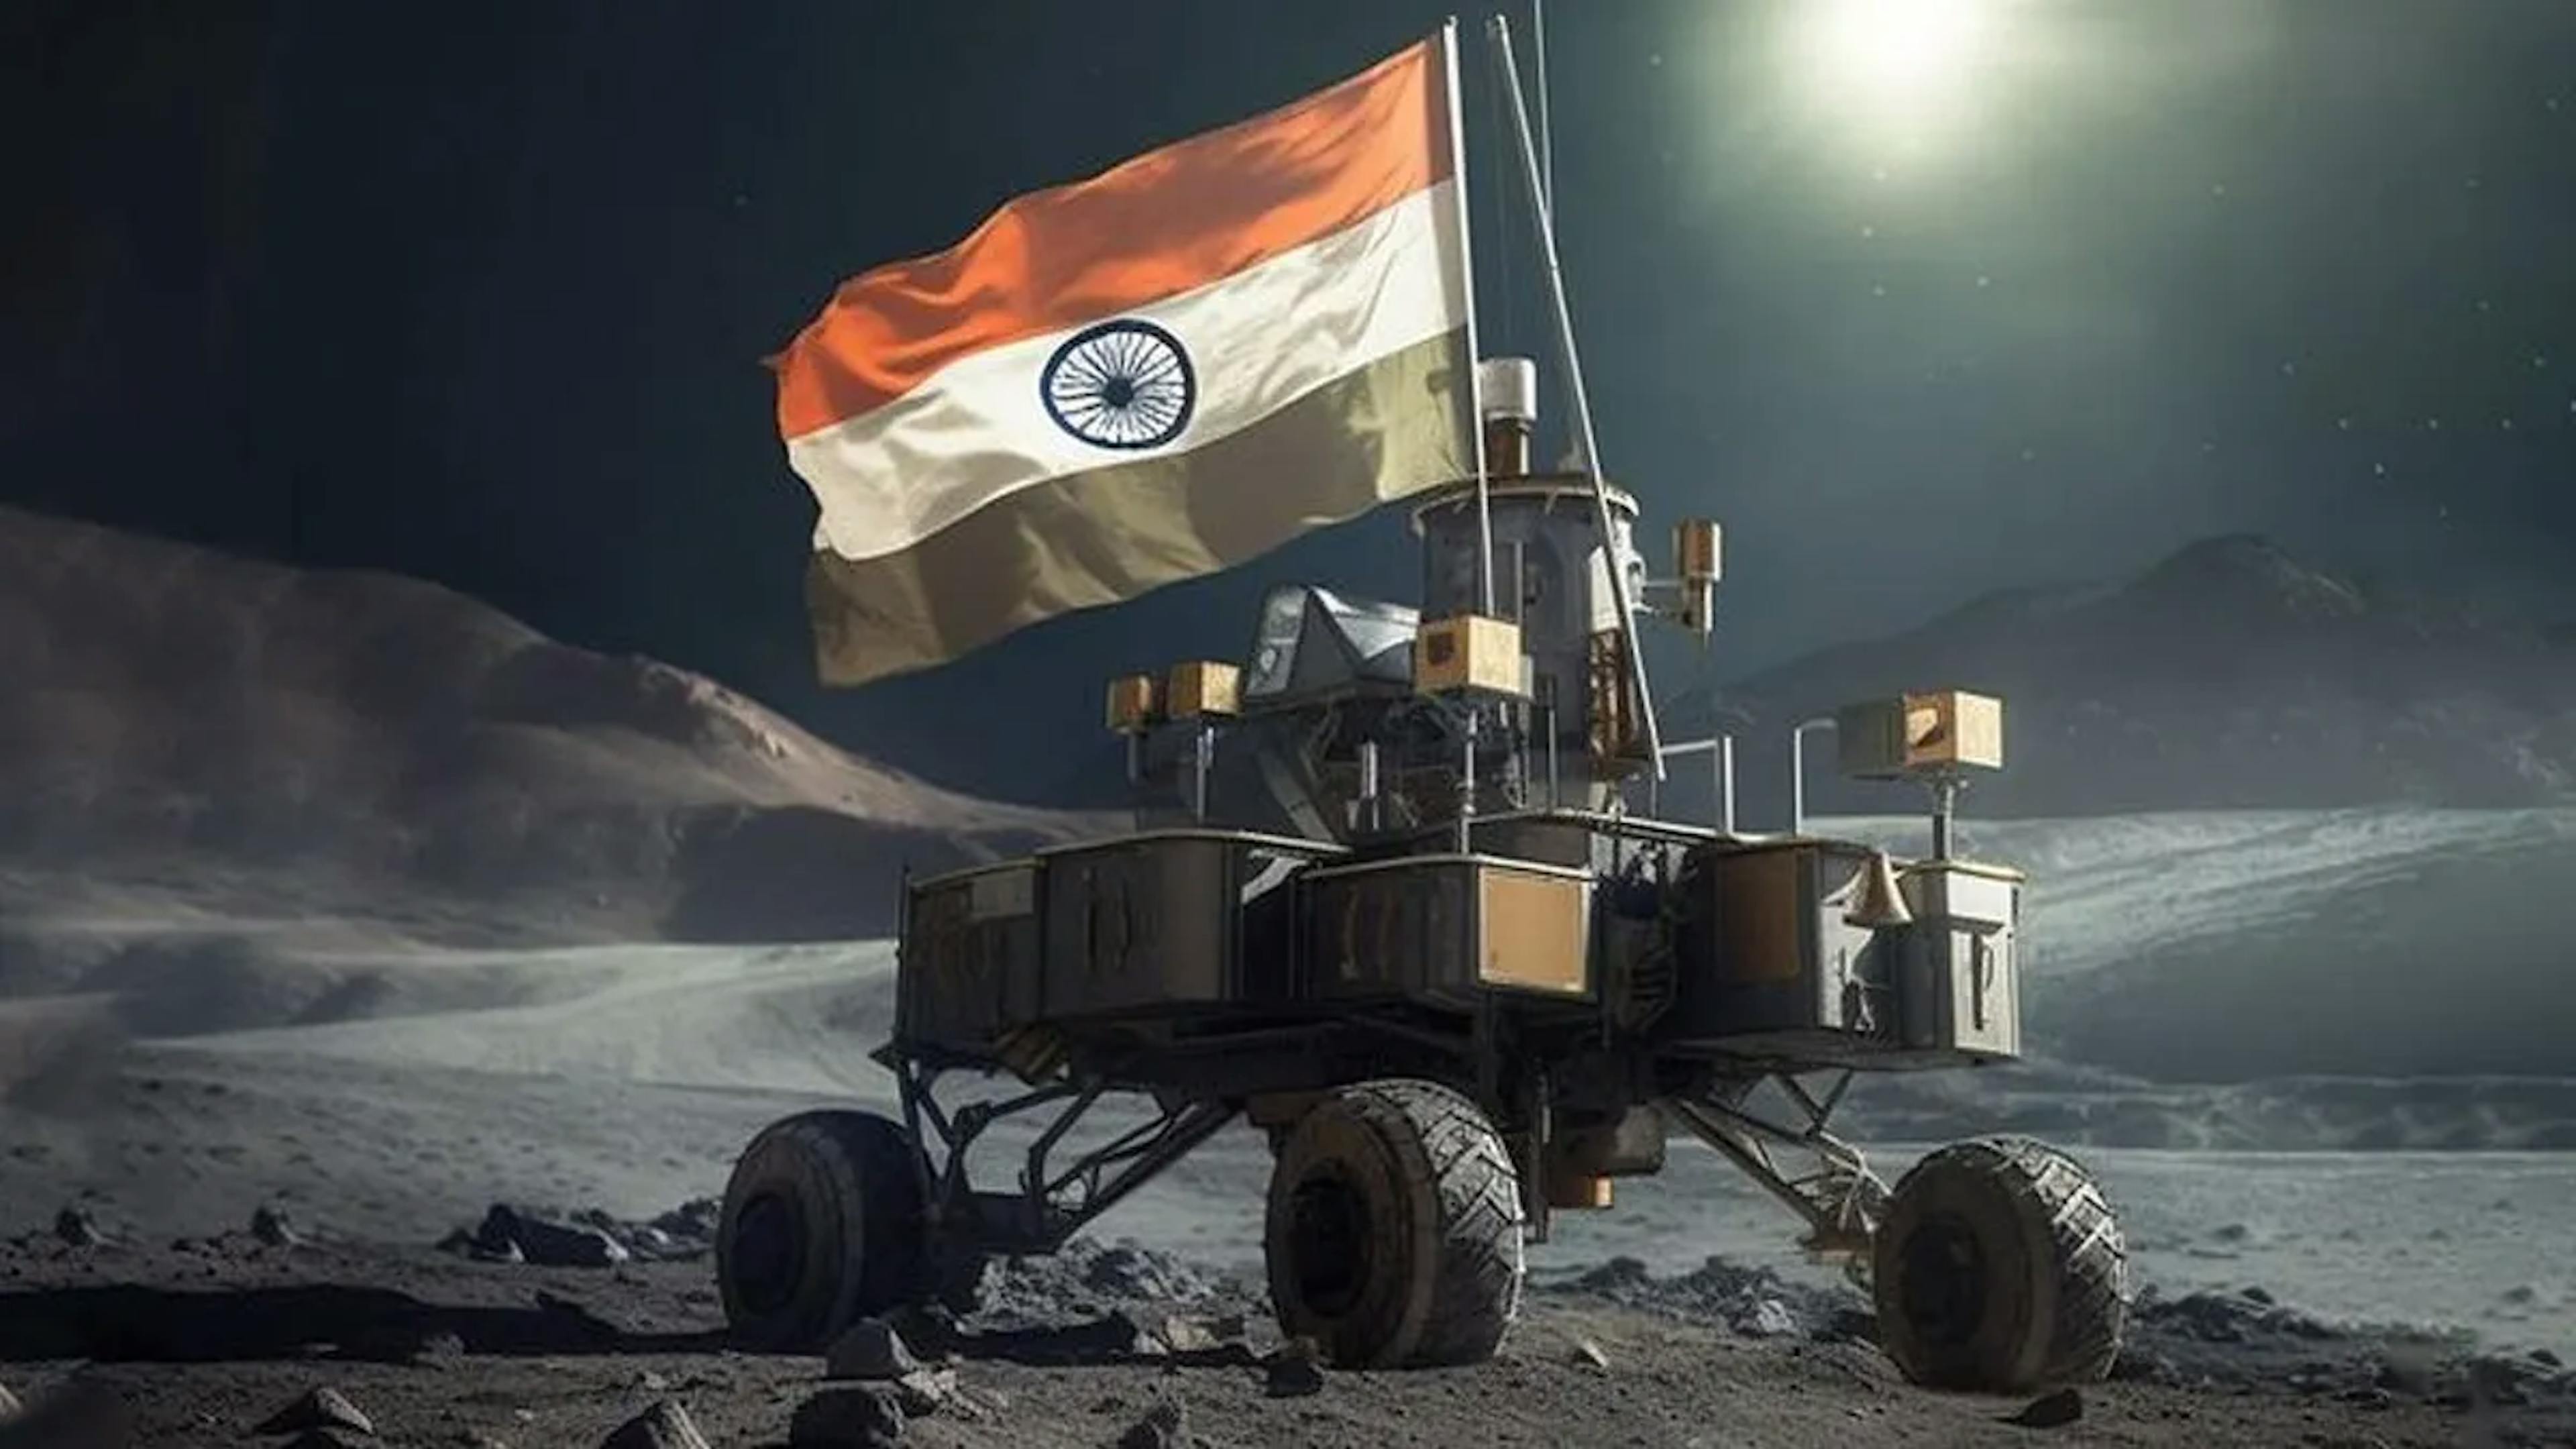 India lands on the moon